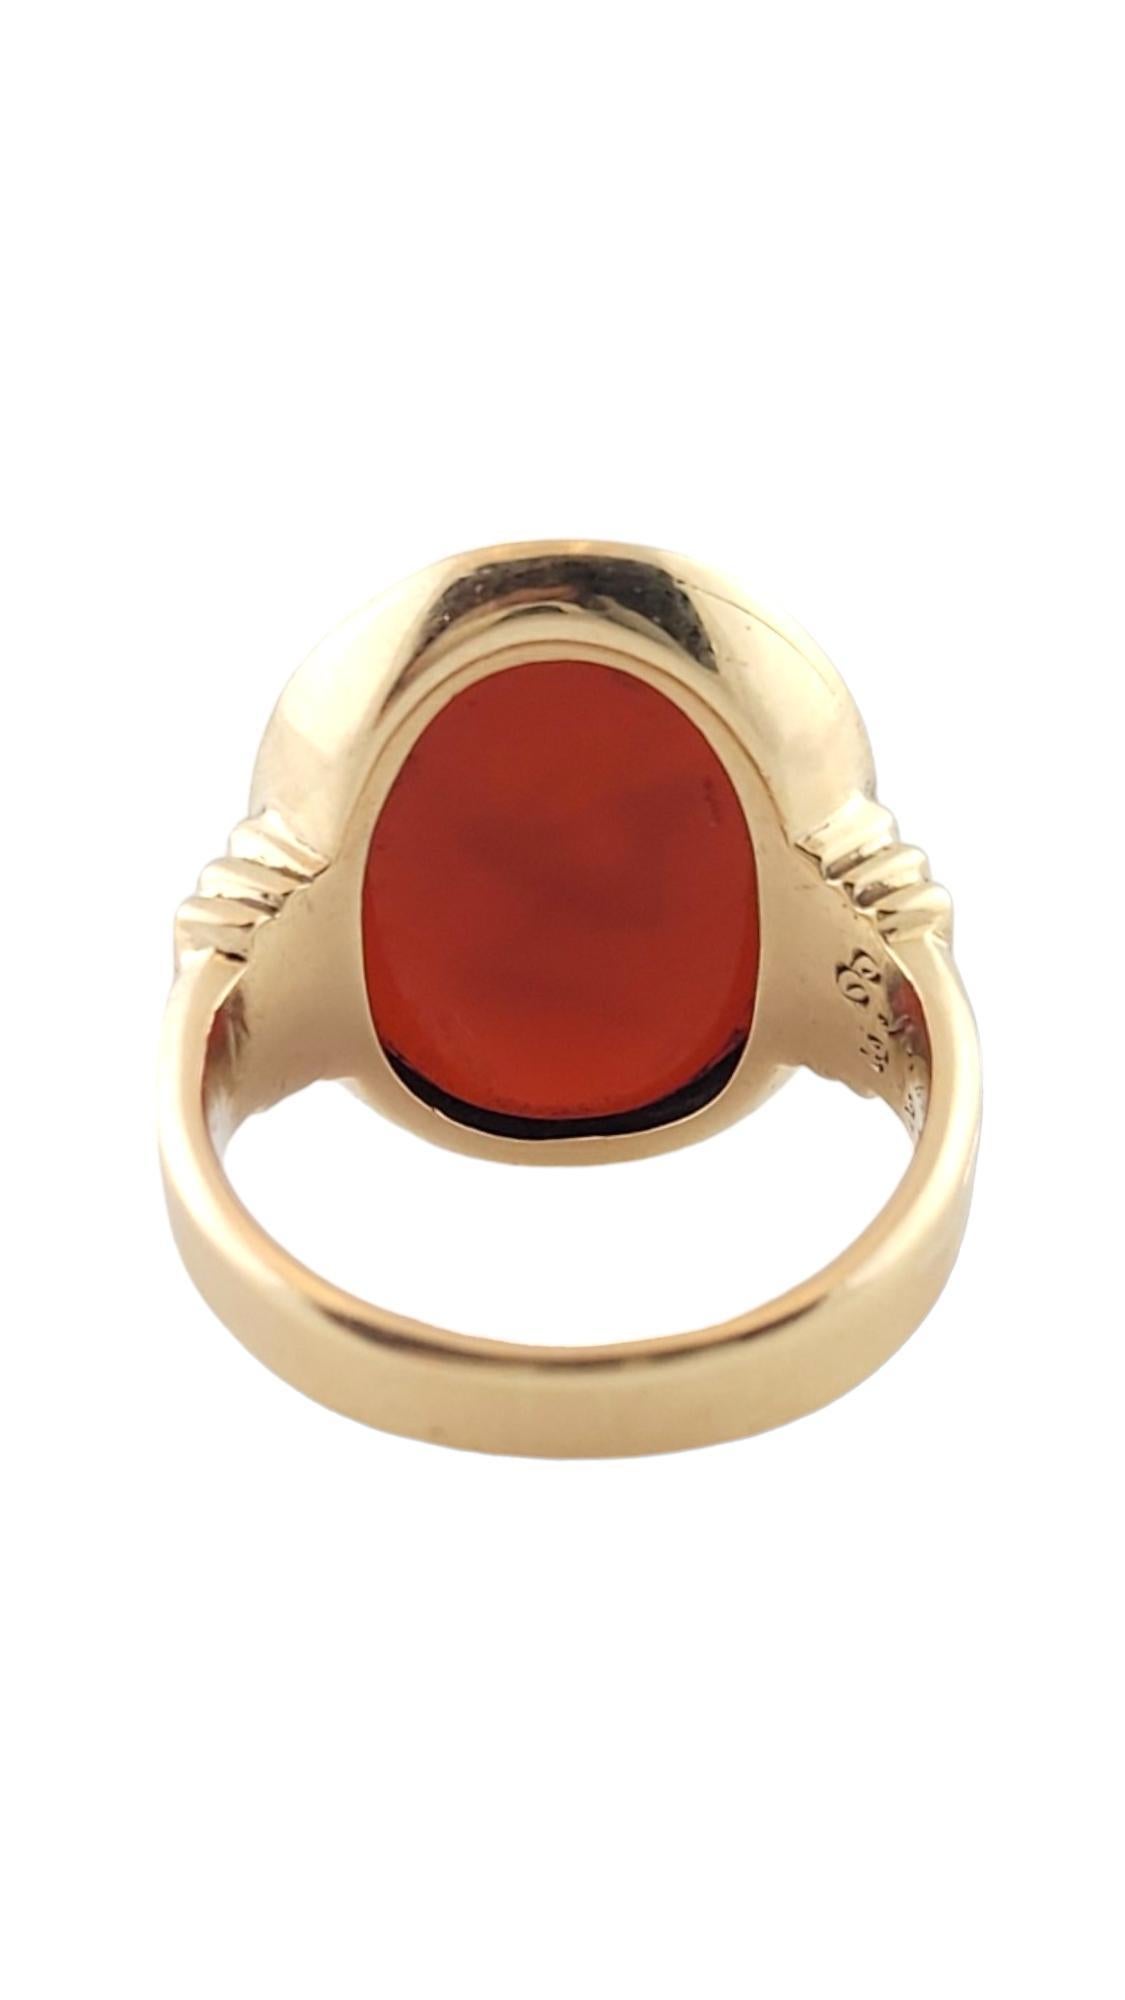 10K Yellow Gold Carnelian Roman Soldier Head Ring Size 7.5 #16181 In Good Condition For Sale In Washington Depot, CT